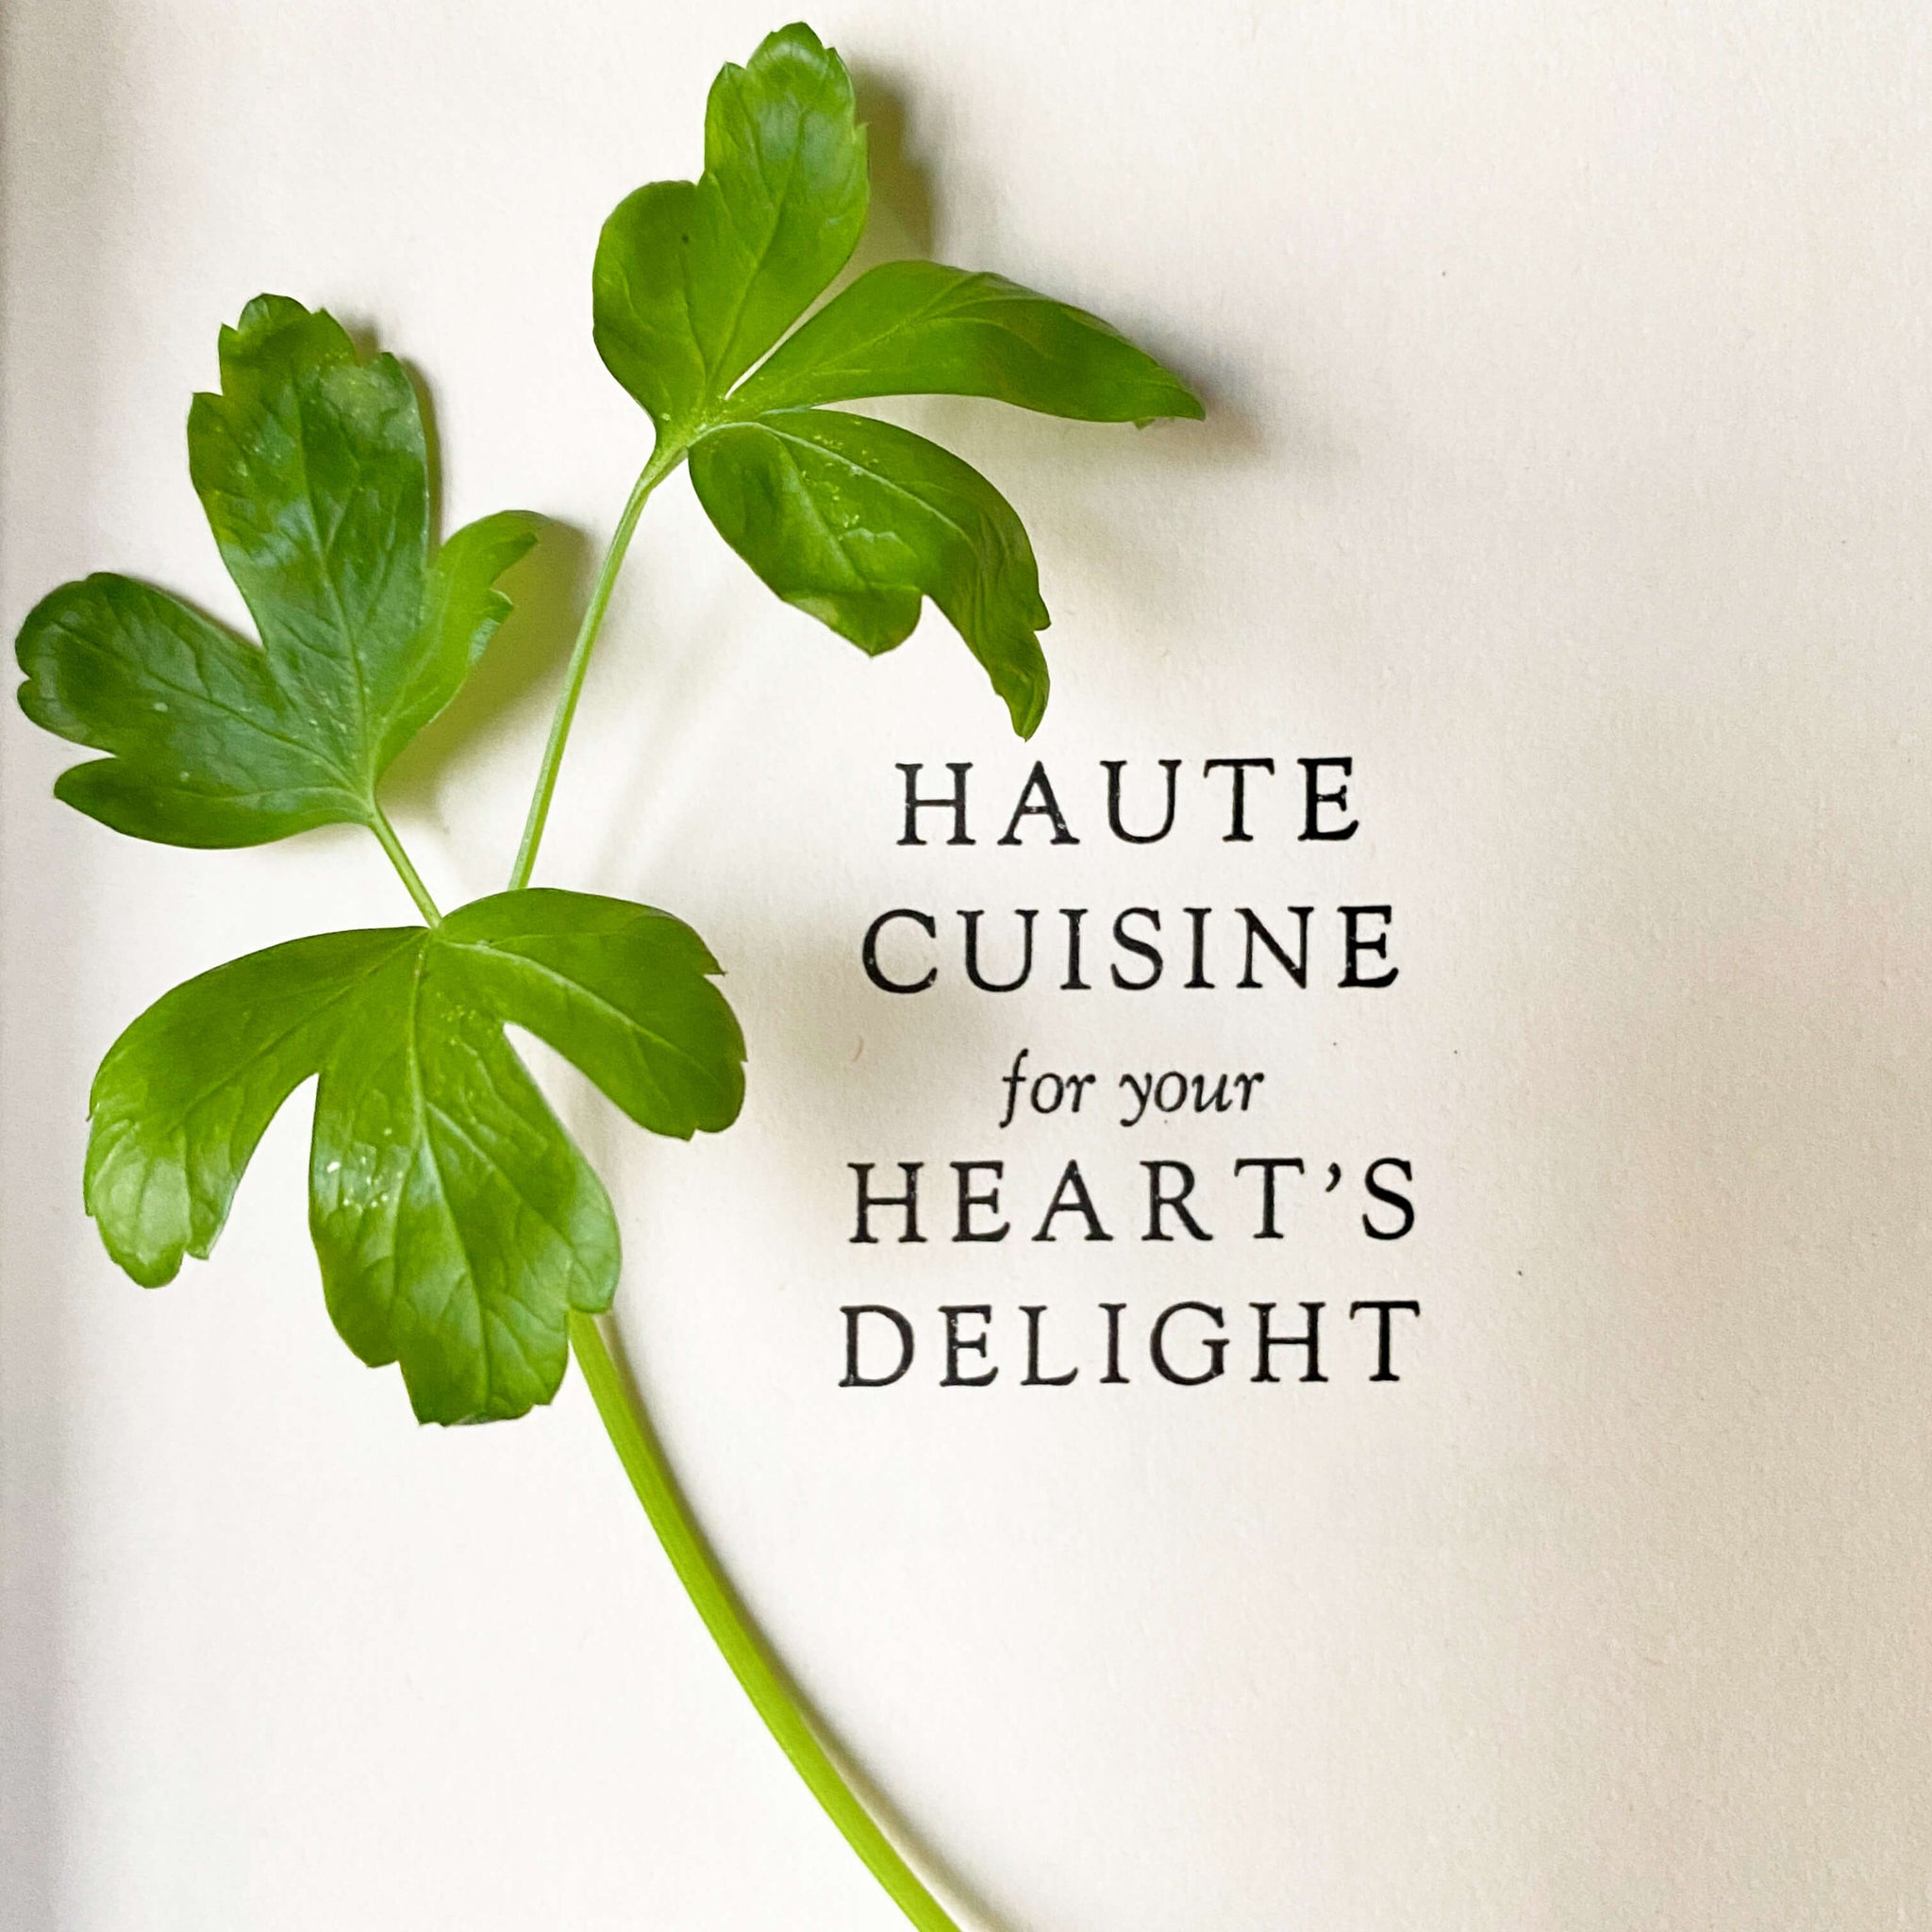 Haute Cuisine for Your Heart's Delight by Carol Cutler - First Edition 1974 Fifth Printing